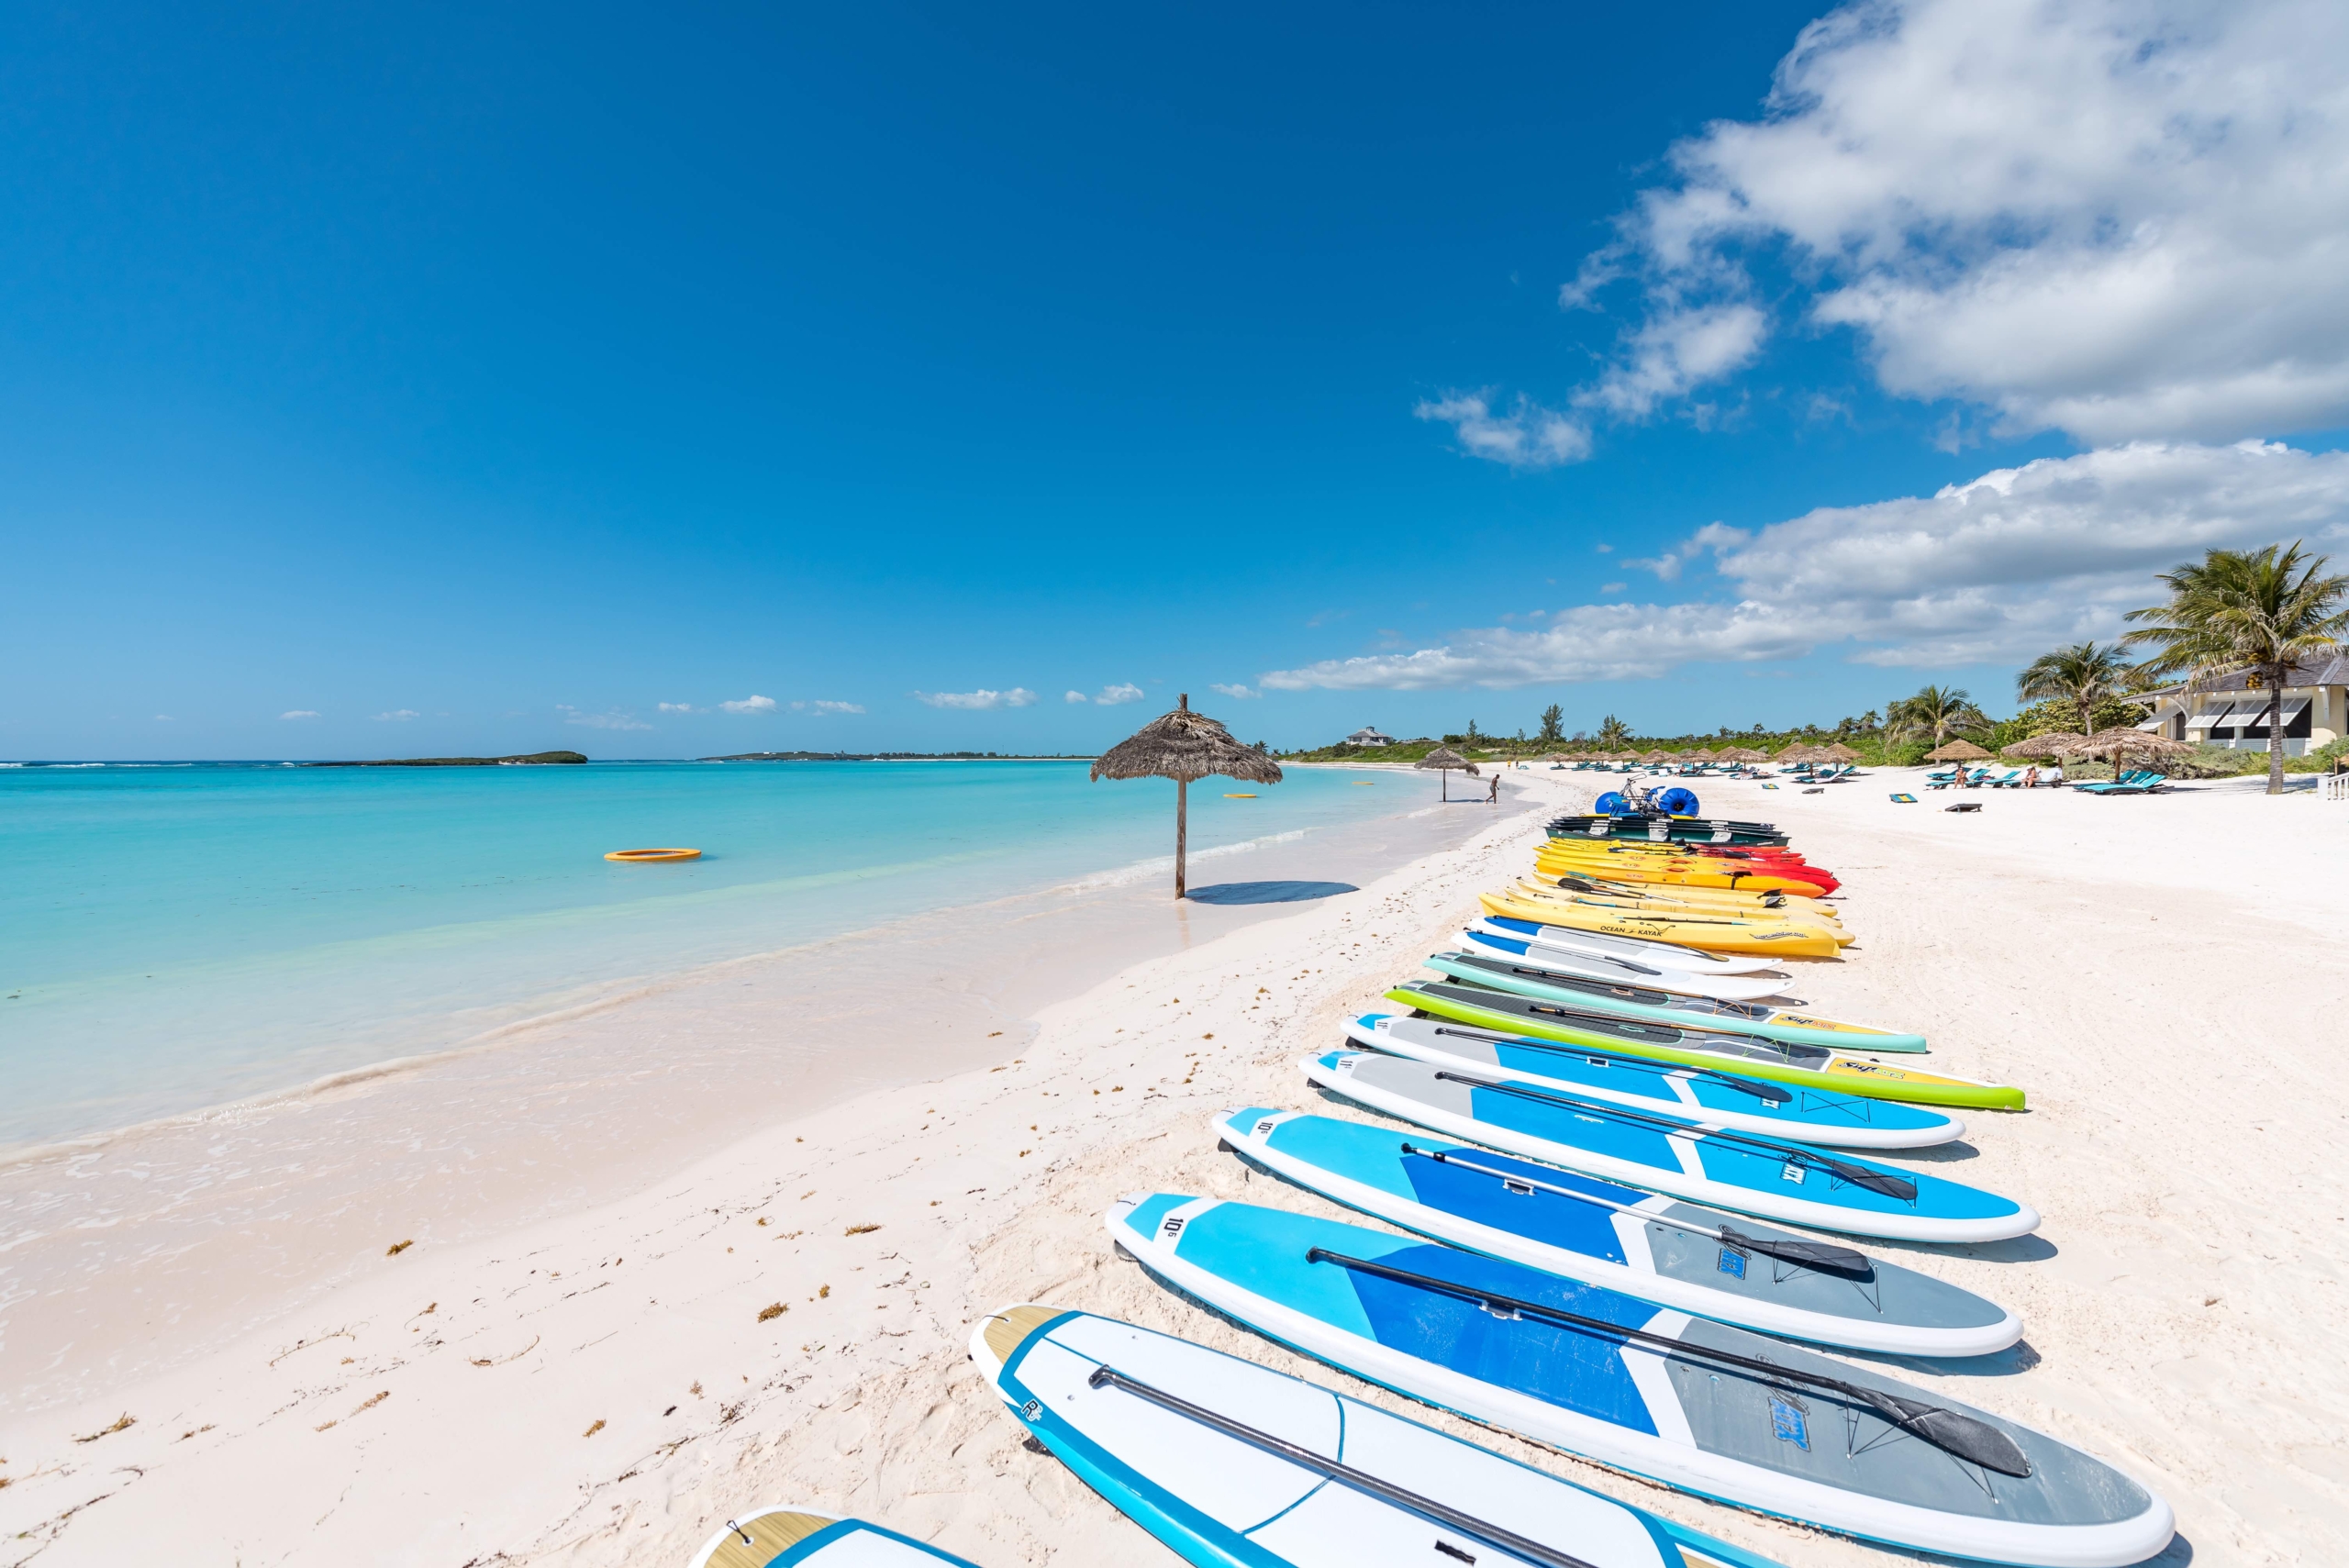 Paddleboards lined up on the beach at The Abaco Club, epitomizing coastal living